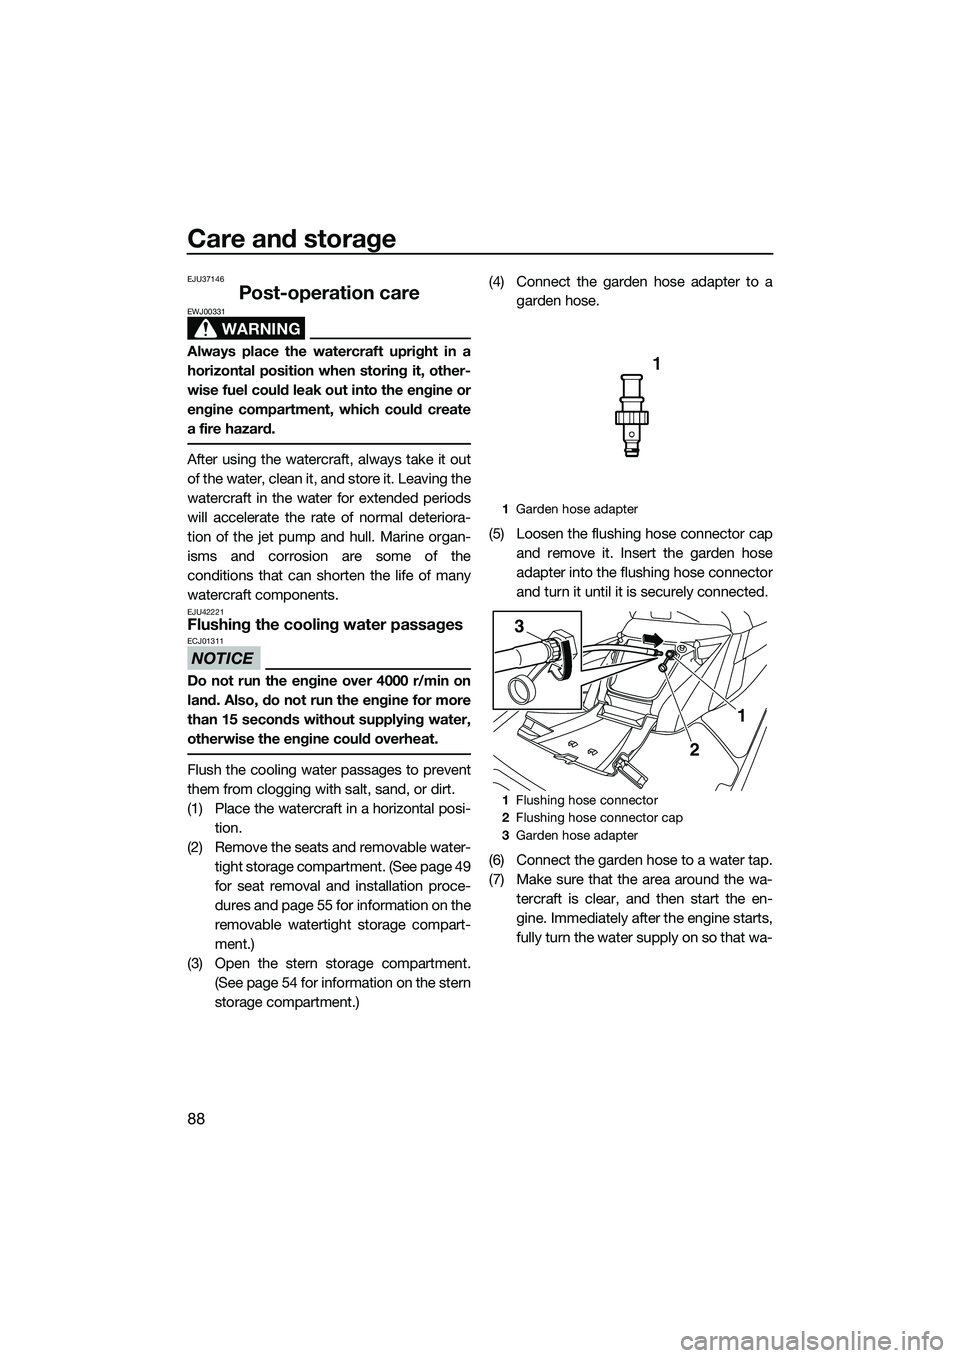 YAMAHA FX HO 2015  Owners Manual Care and storage
88
EJU37146
Post-operation care
WARNING
EWJ00331
Always place the watercraft upright in a
horizontal position when storing it, other-
wise fuel could leak out into the engine or
engin